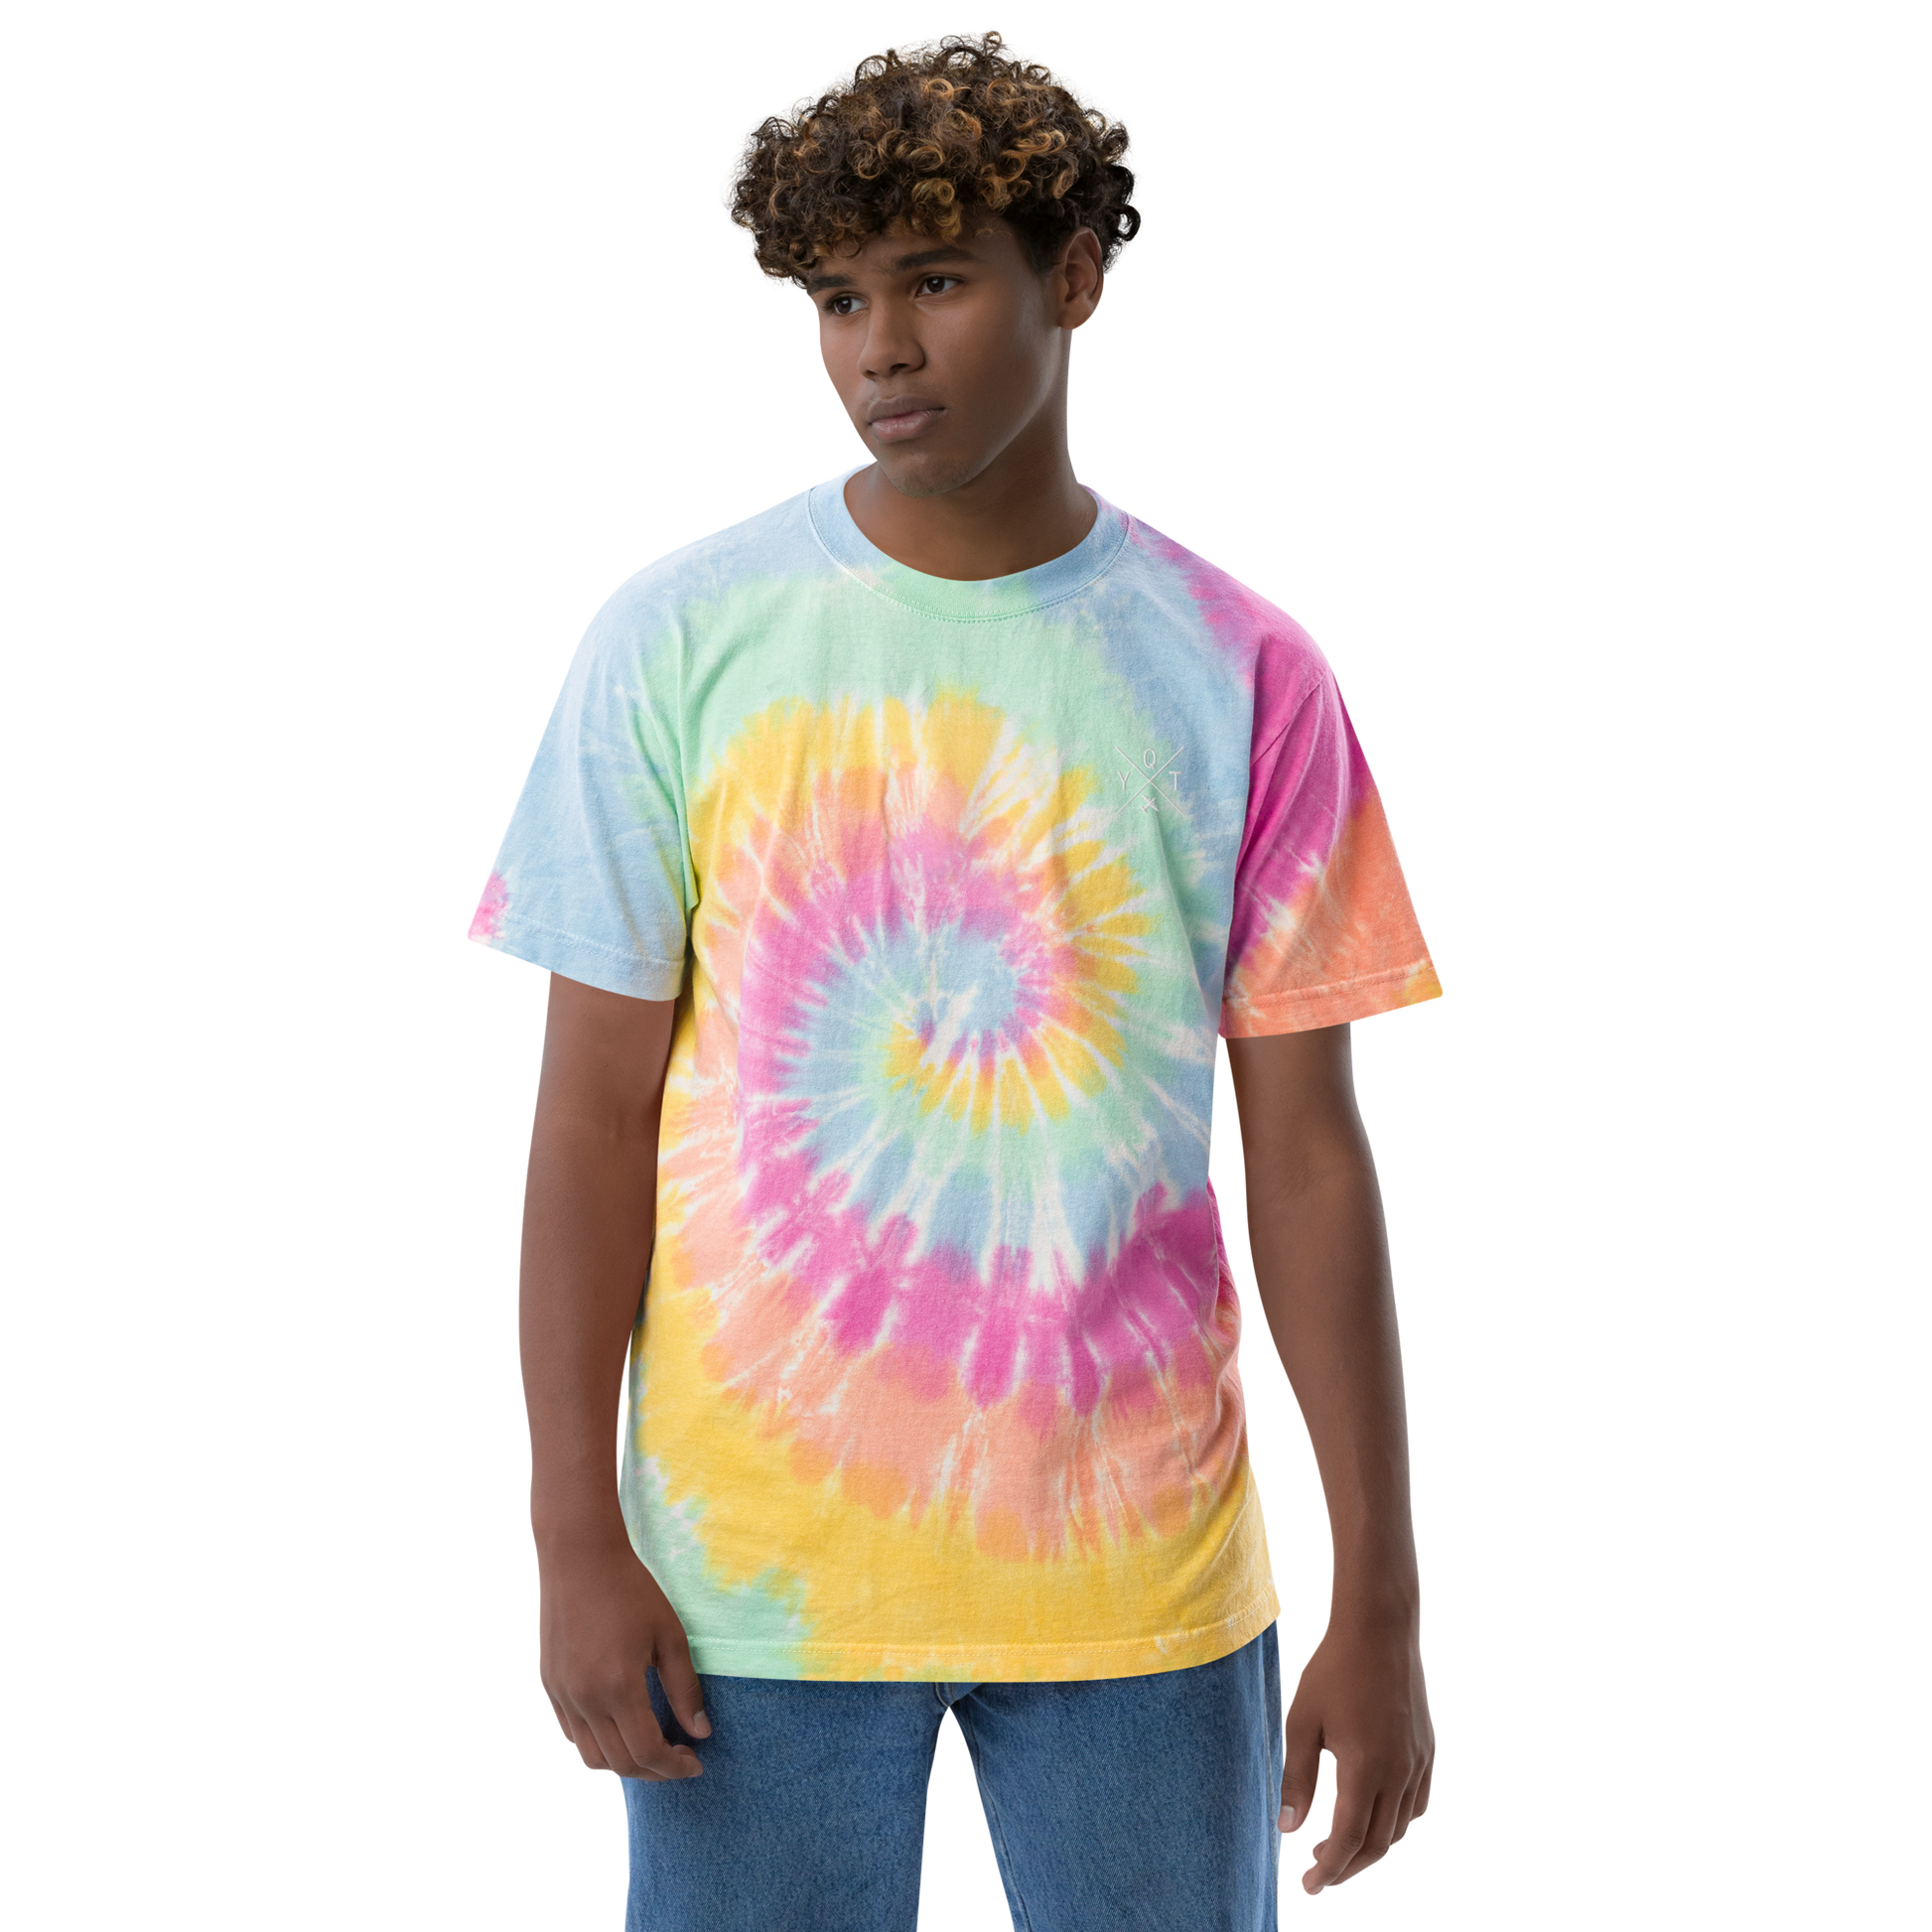 YHM Designs - YQT Thunder Bay Oversized Tie-Dye T-Shirt - Crossed-X Design with Airport Code and Vintage Propliner - White Embroidery - Image 04